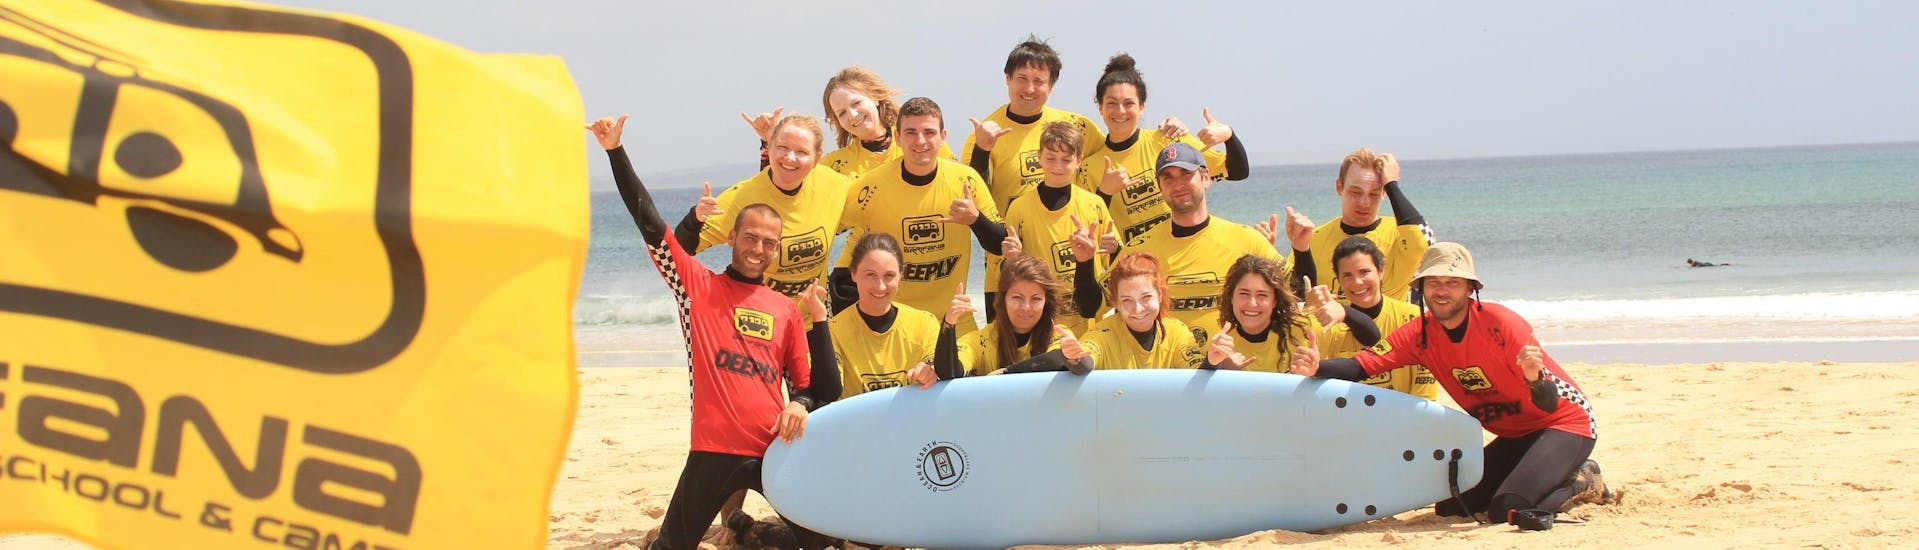 A group of advanced surfers is posing fro a photo with their surf guide from Arrifana Surf School at Praia da Arrifana.